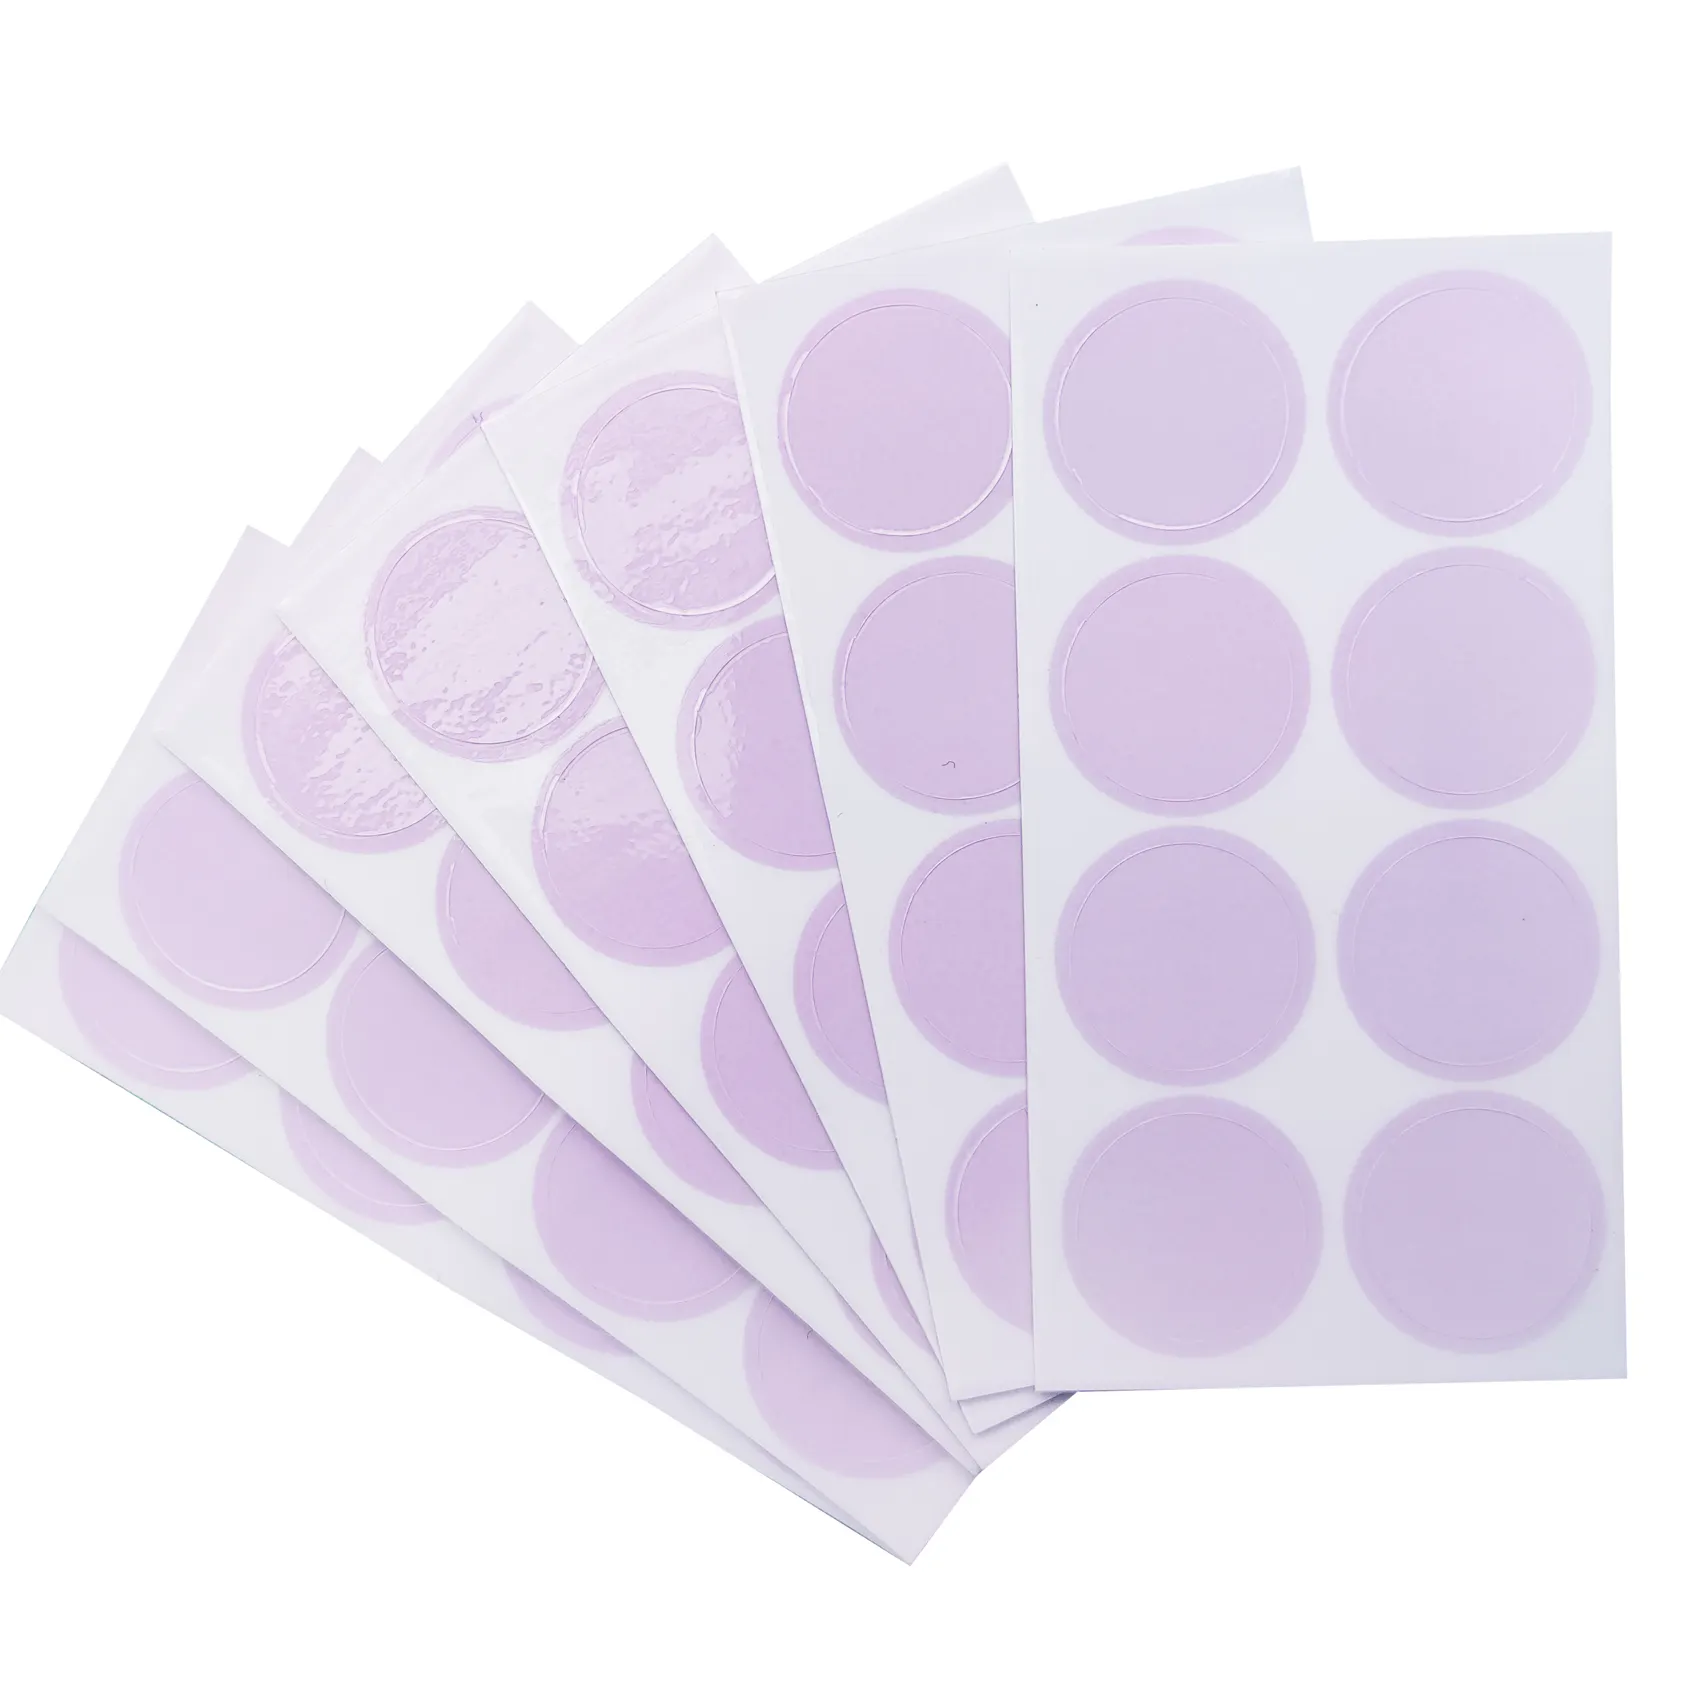 12 Pack UV Stickers for Sunscreen Patented SPF Sensing Technology 100pcs price